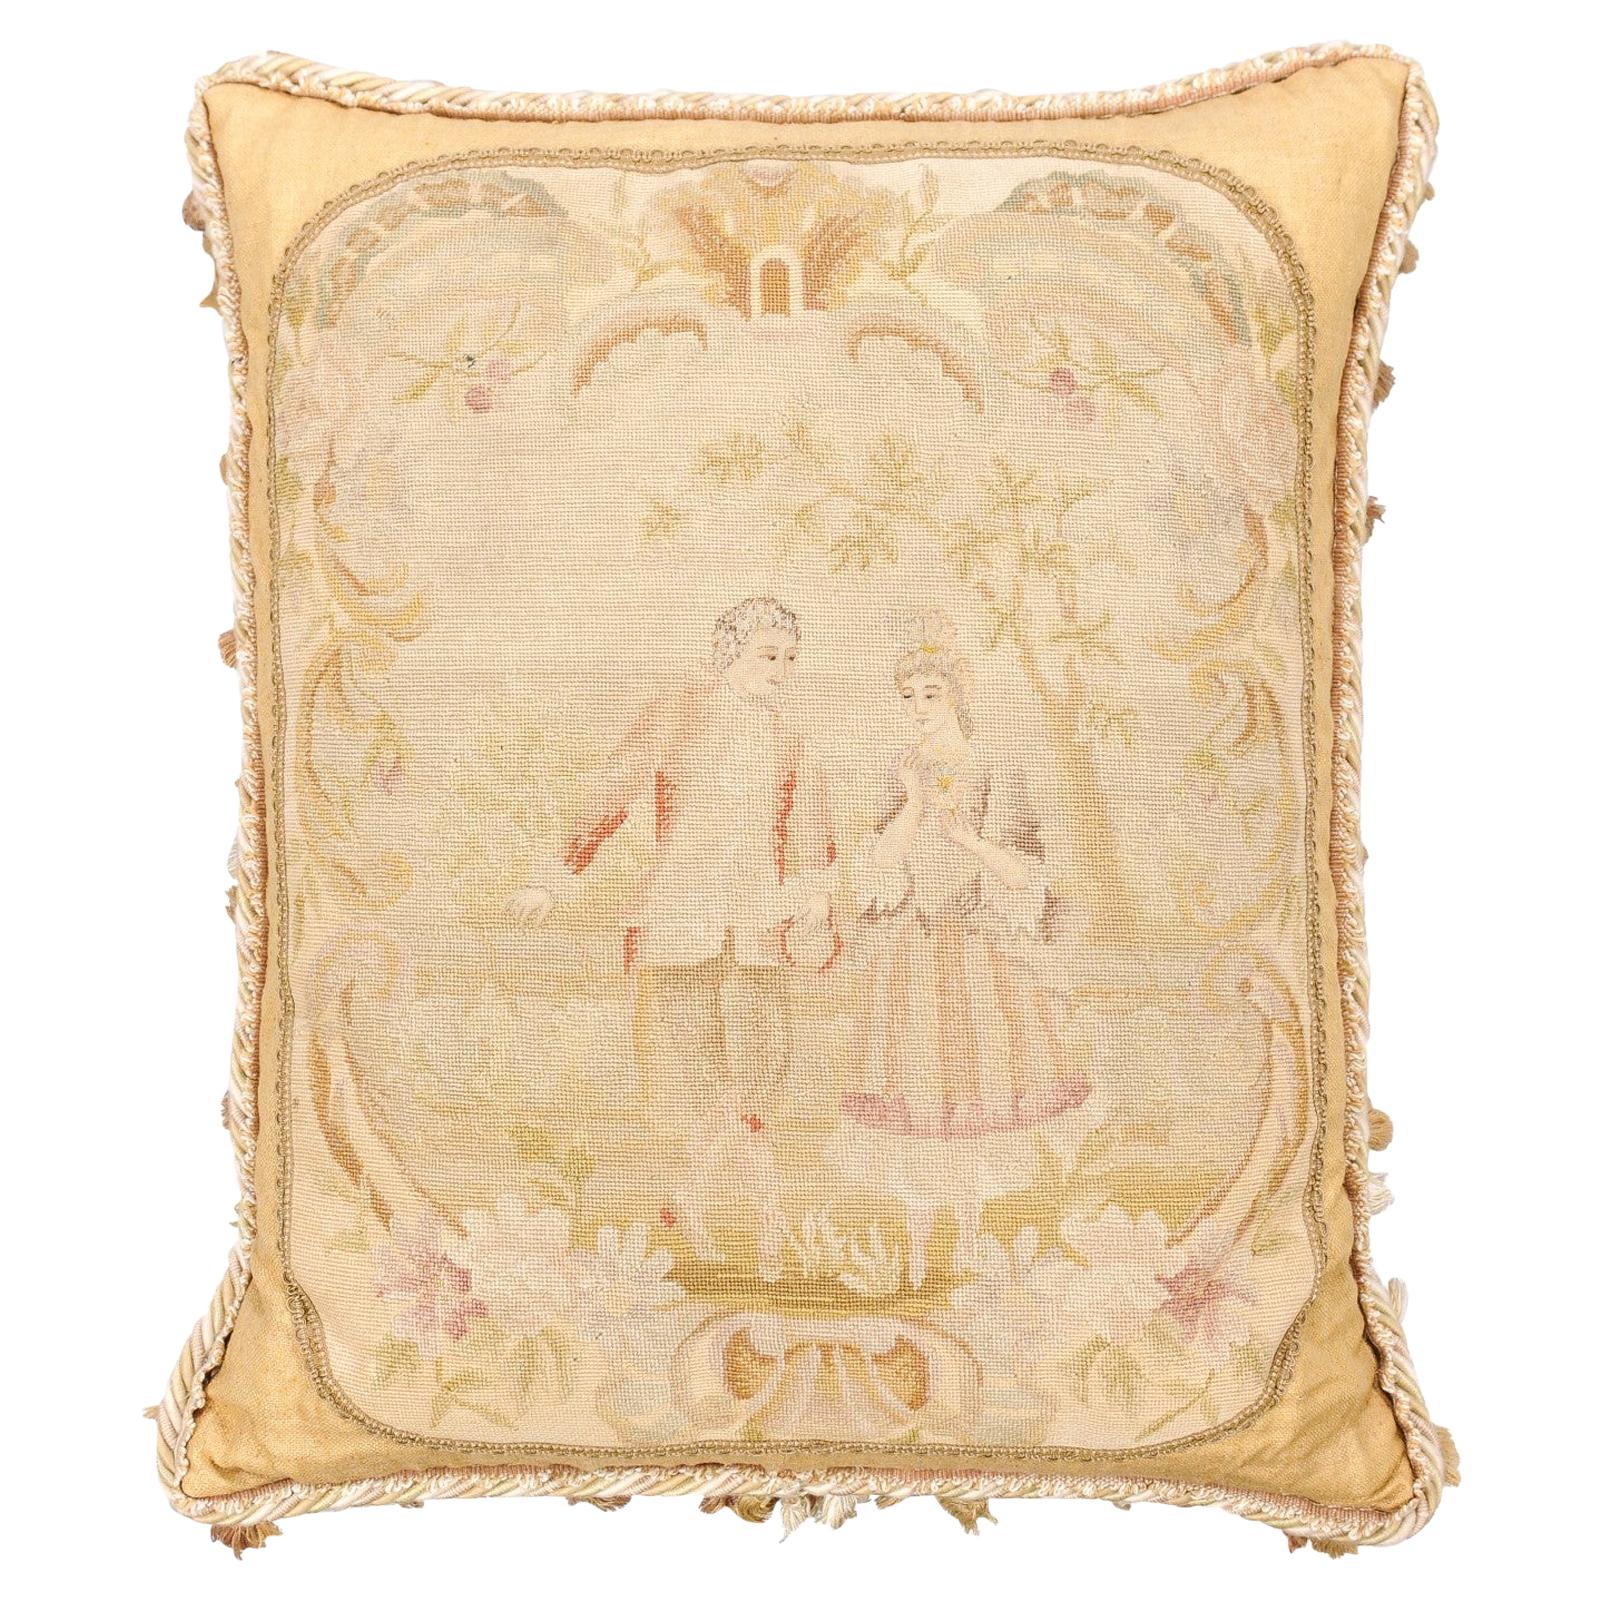 French 19th Century Needlepoint Tapestry Pillow Depicting Two Artistocrates For Sale